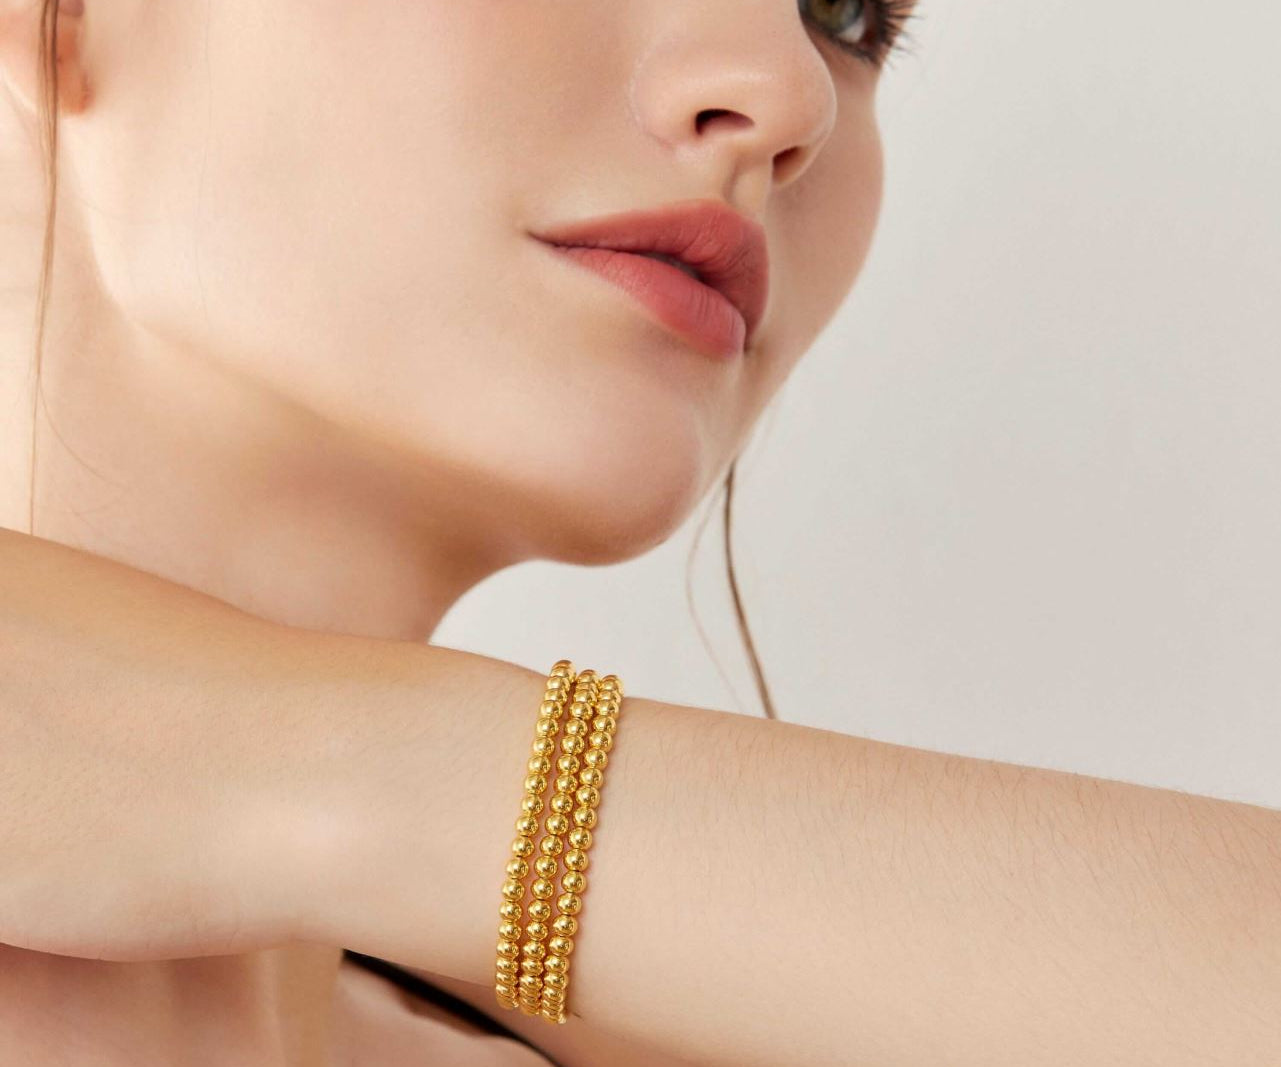 Gold Filled Beaded BraceletsHandcrafted Fine Jewelry